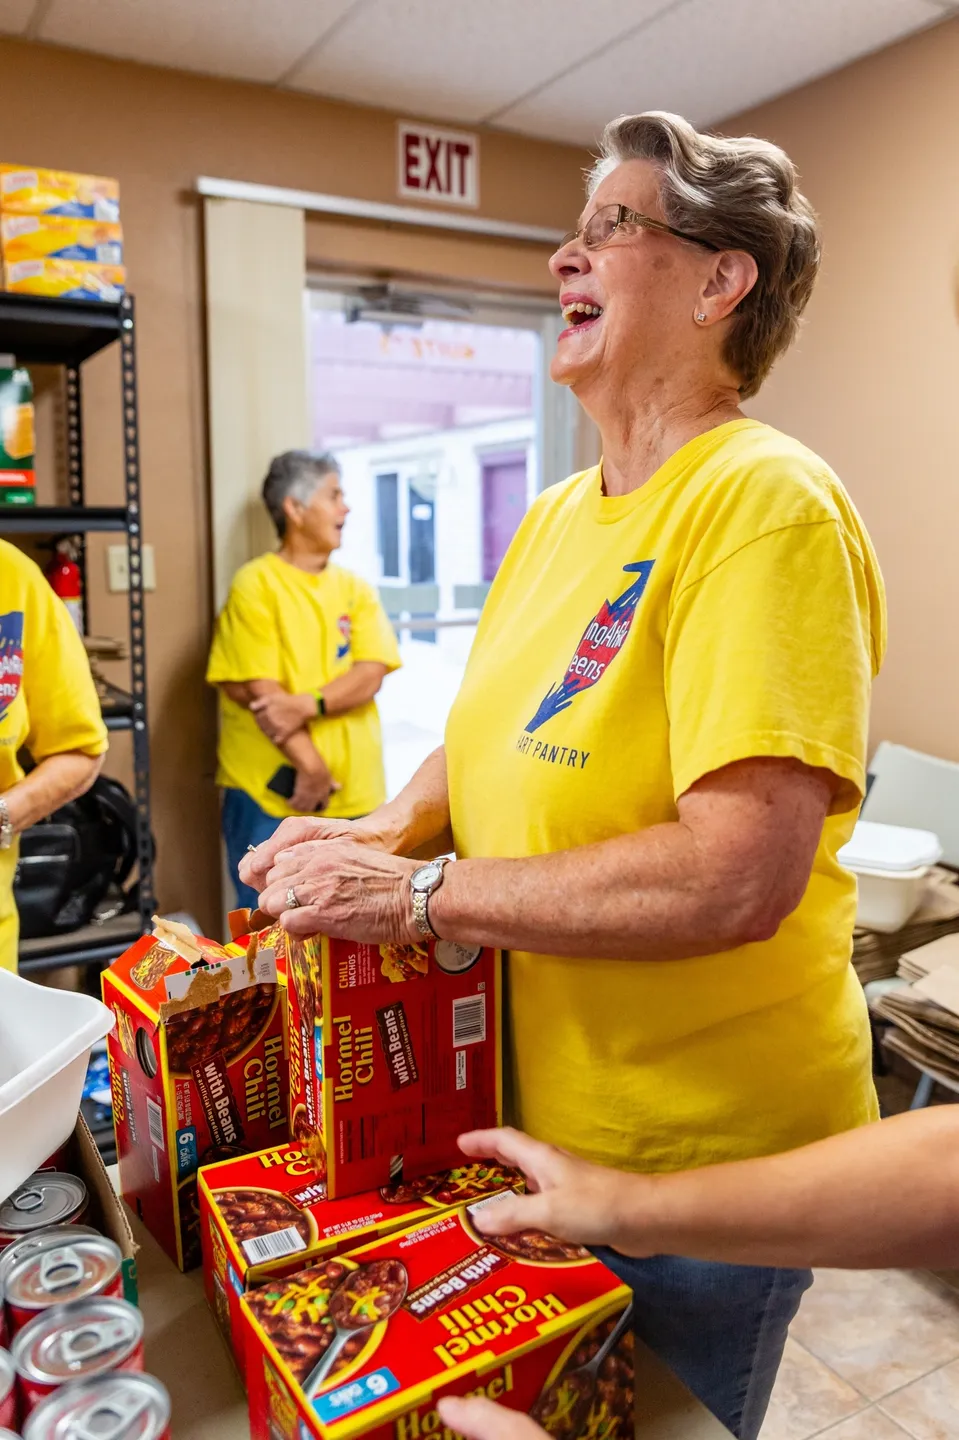 A woman in yellow shirt holding onto boxes of food.